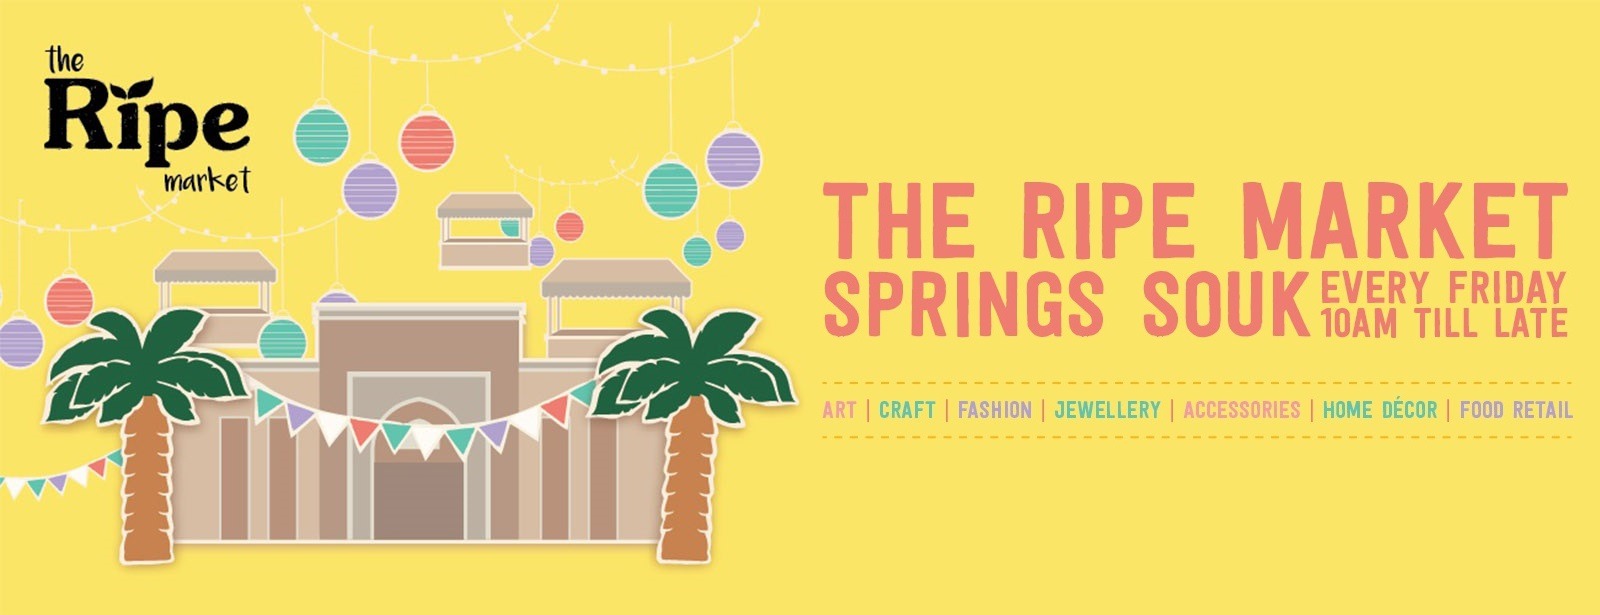 The Ripe Market at The Springs Souk - Coming Soon in UAE